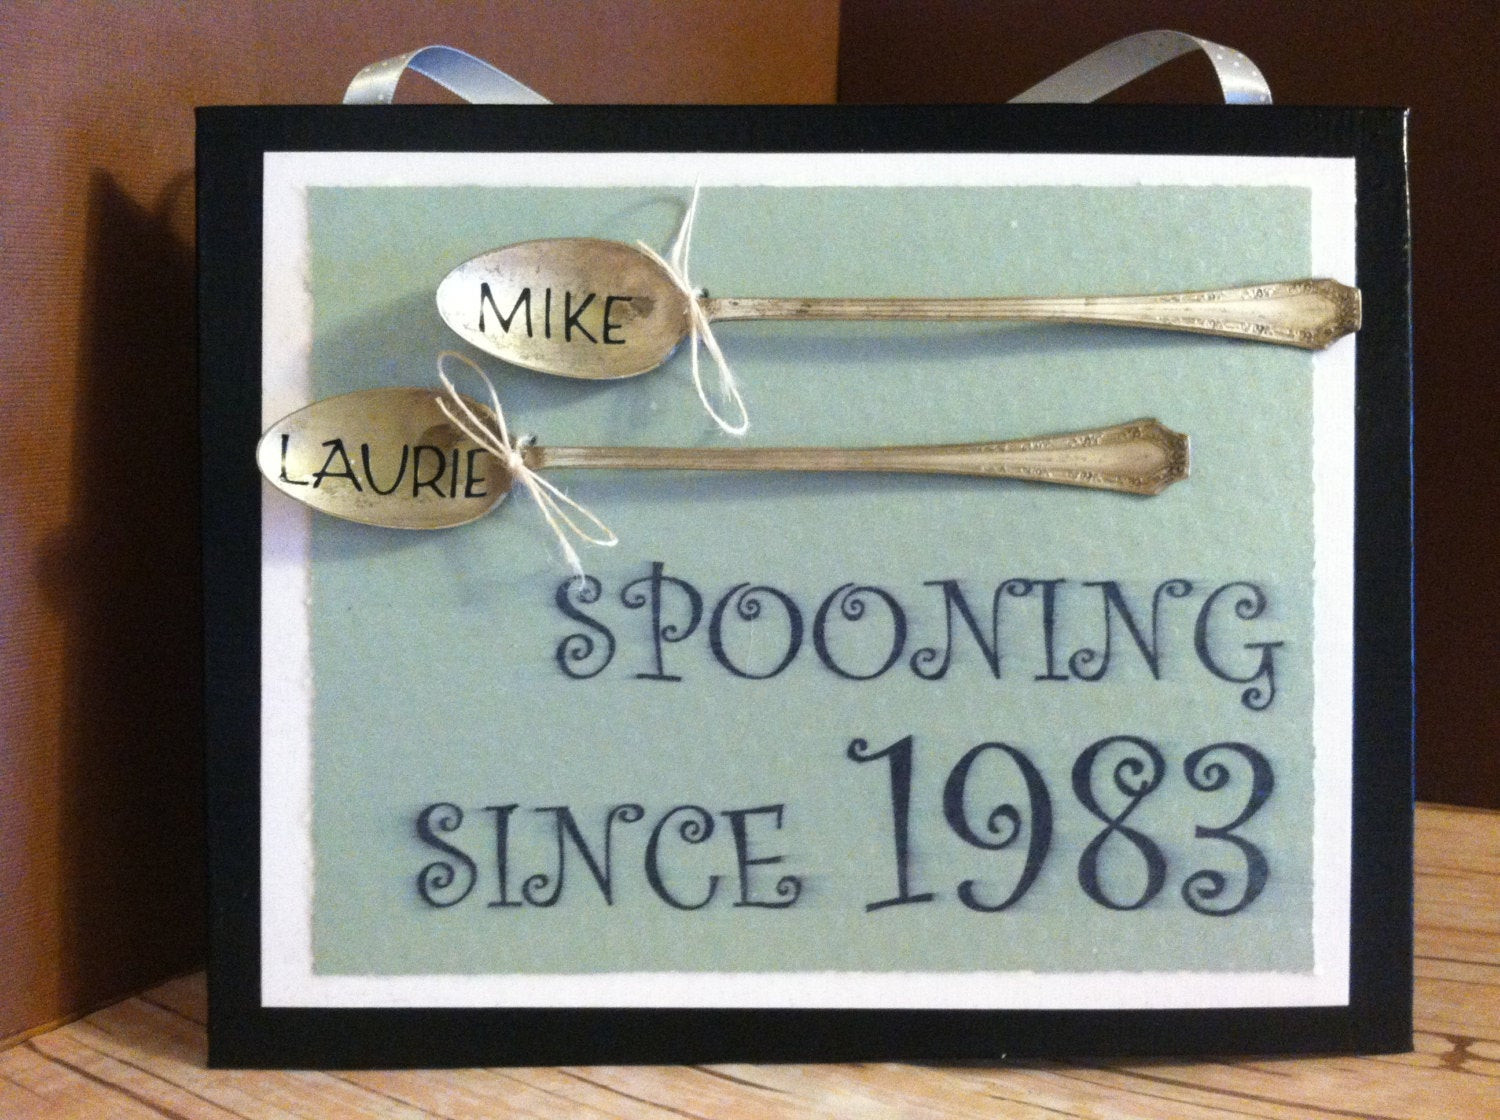 Great Anniversary Gift Ideas
 Spooning Canvas Design 2 Great wedding or anniversary